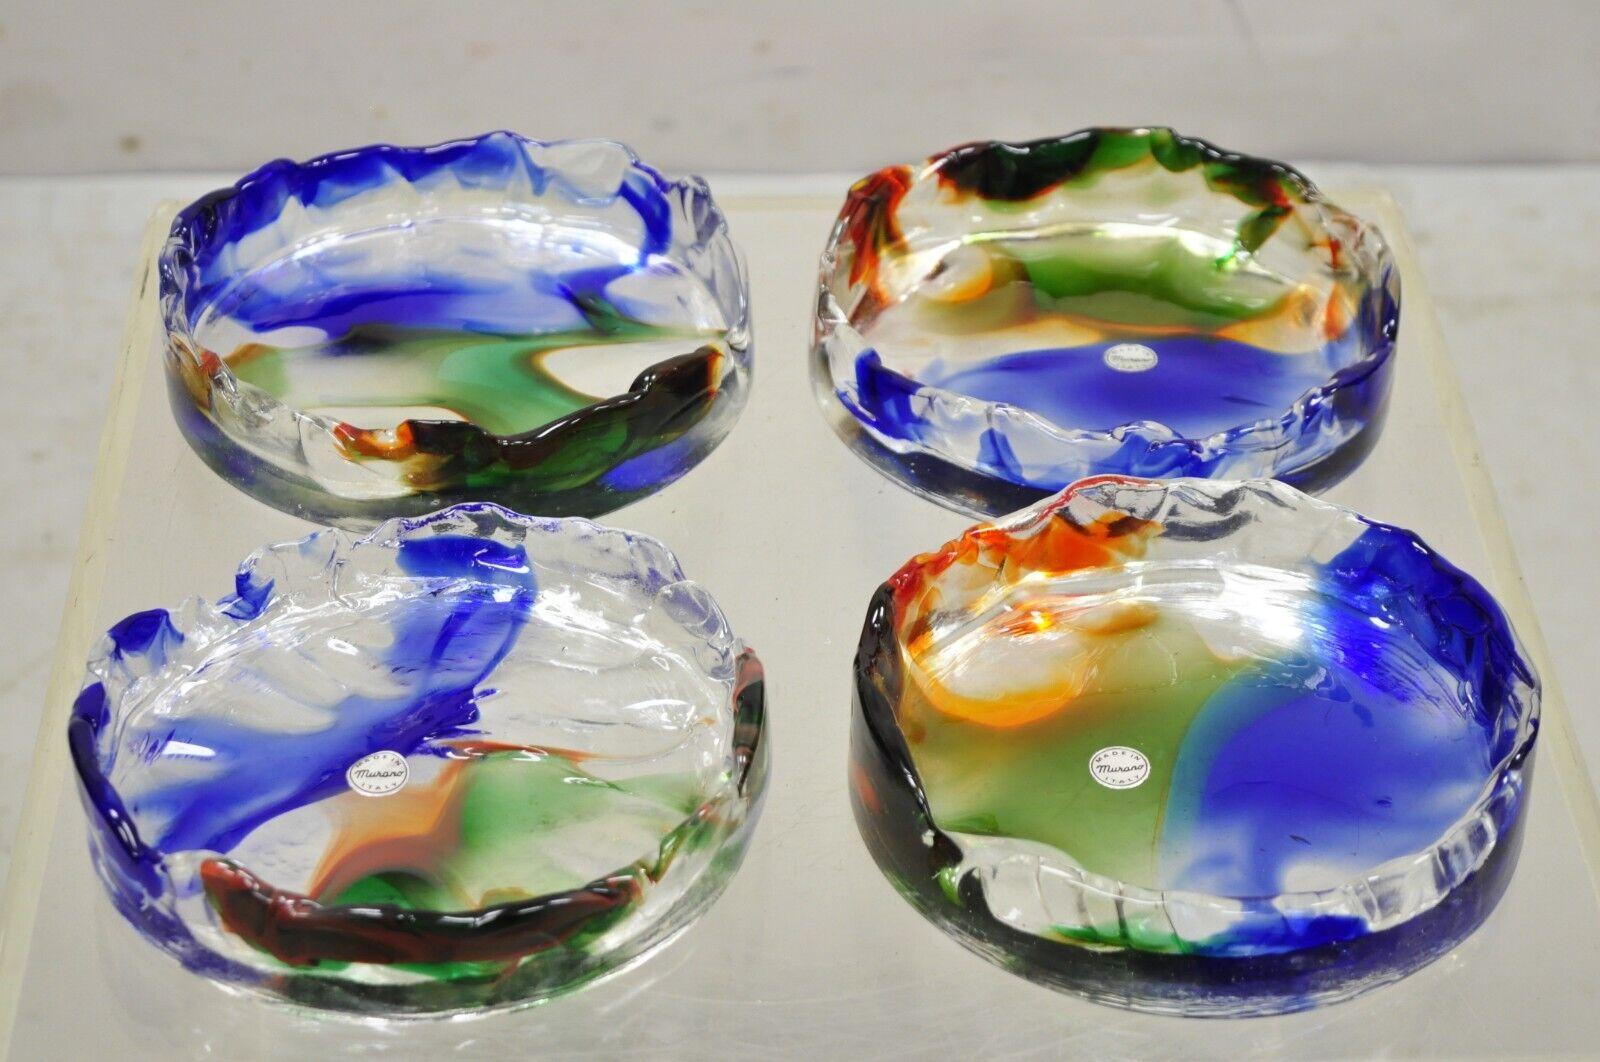 Vintage Mid-Century Modern Italian Murano Blue Green Art Glass Ashtray Catchall (Price is per piece). Item features a beautiful blown glass, wonderful vibrant color, groove for holding your smoking item of choice, original label, very nice vintage